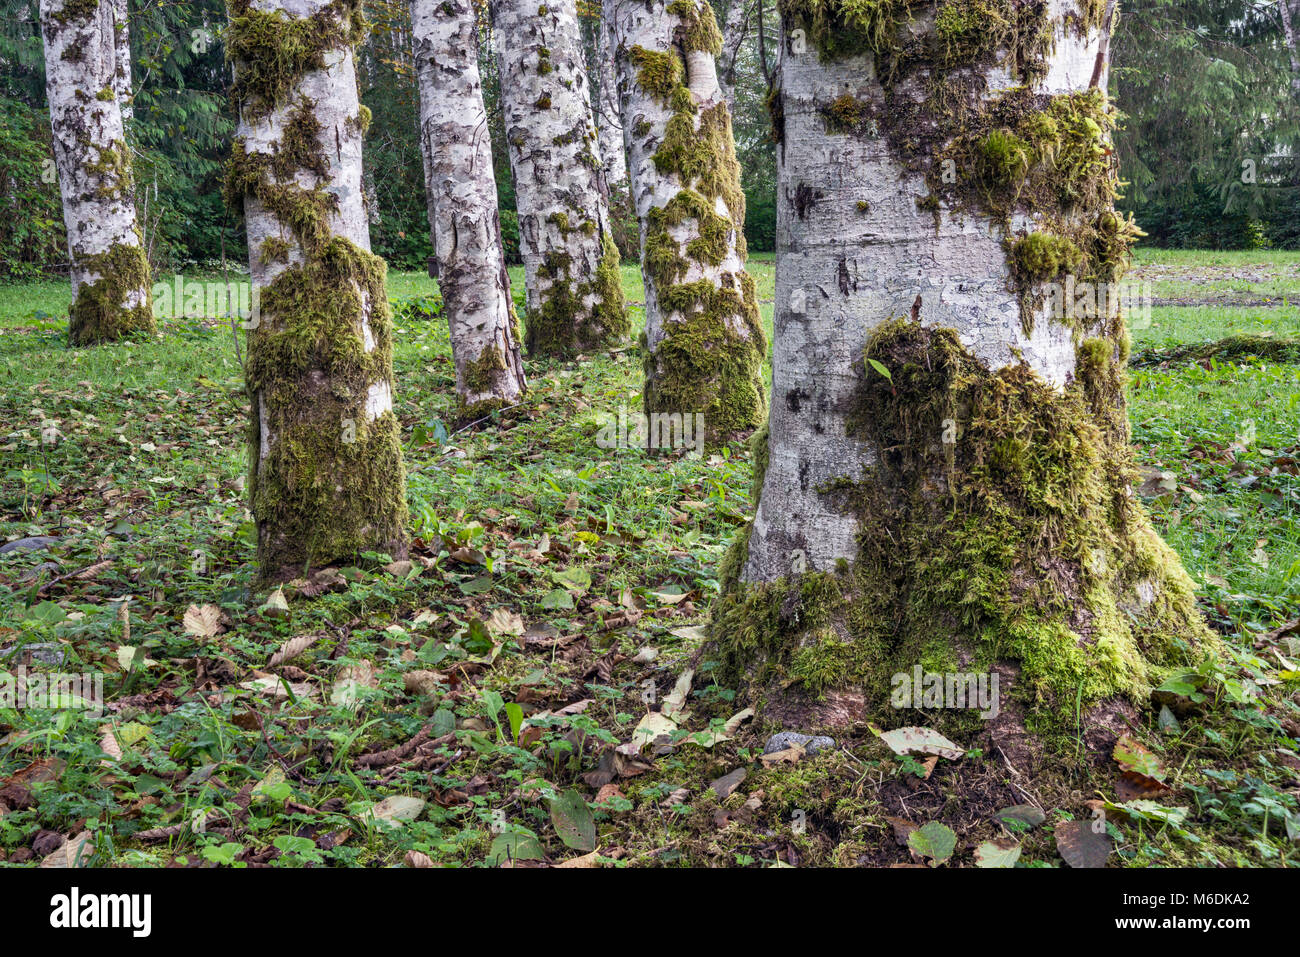 Birch trees, trunks covered with moss, at Cevallos Campsite, village of Zeballos, North Vancouver Island, British Columbia, Canada Stock Photo